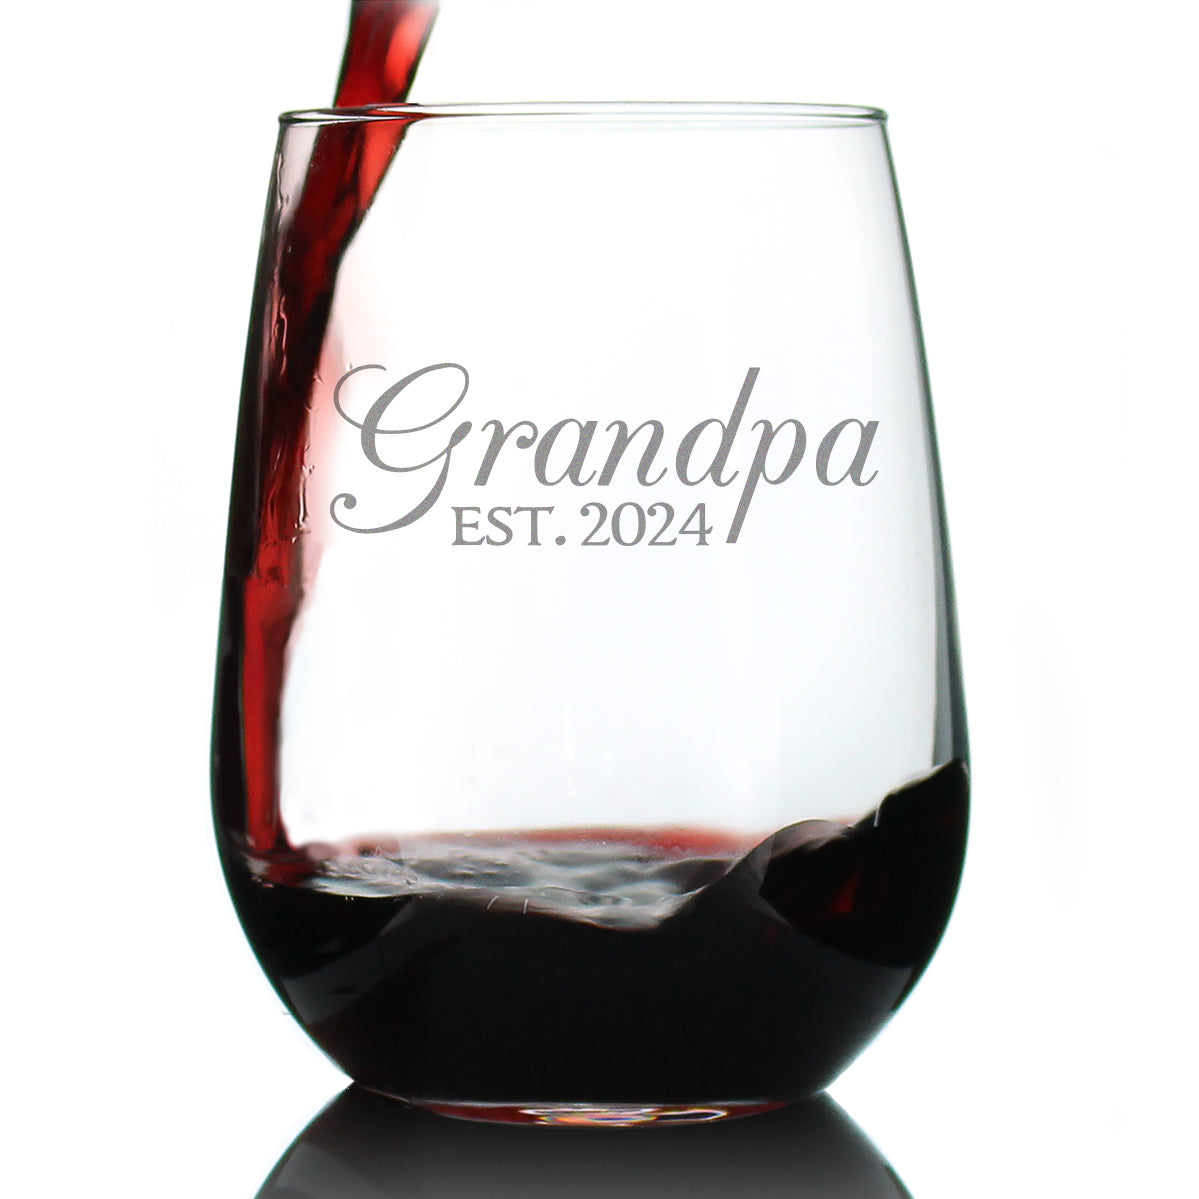 Grandpa Est 2024 - New Grandfather Stemless Wine Glass Gift for First Time Grandparents - Decorative 17 Oz Large Glasses